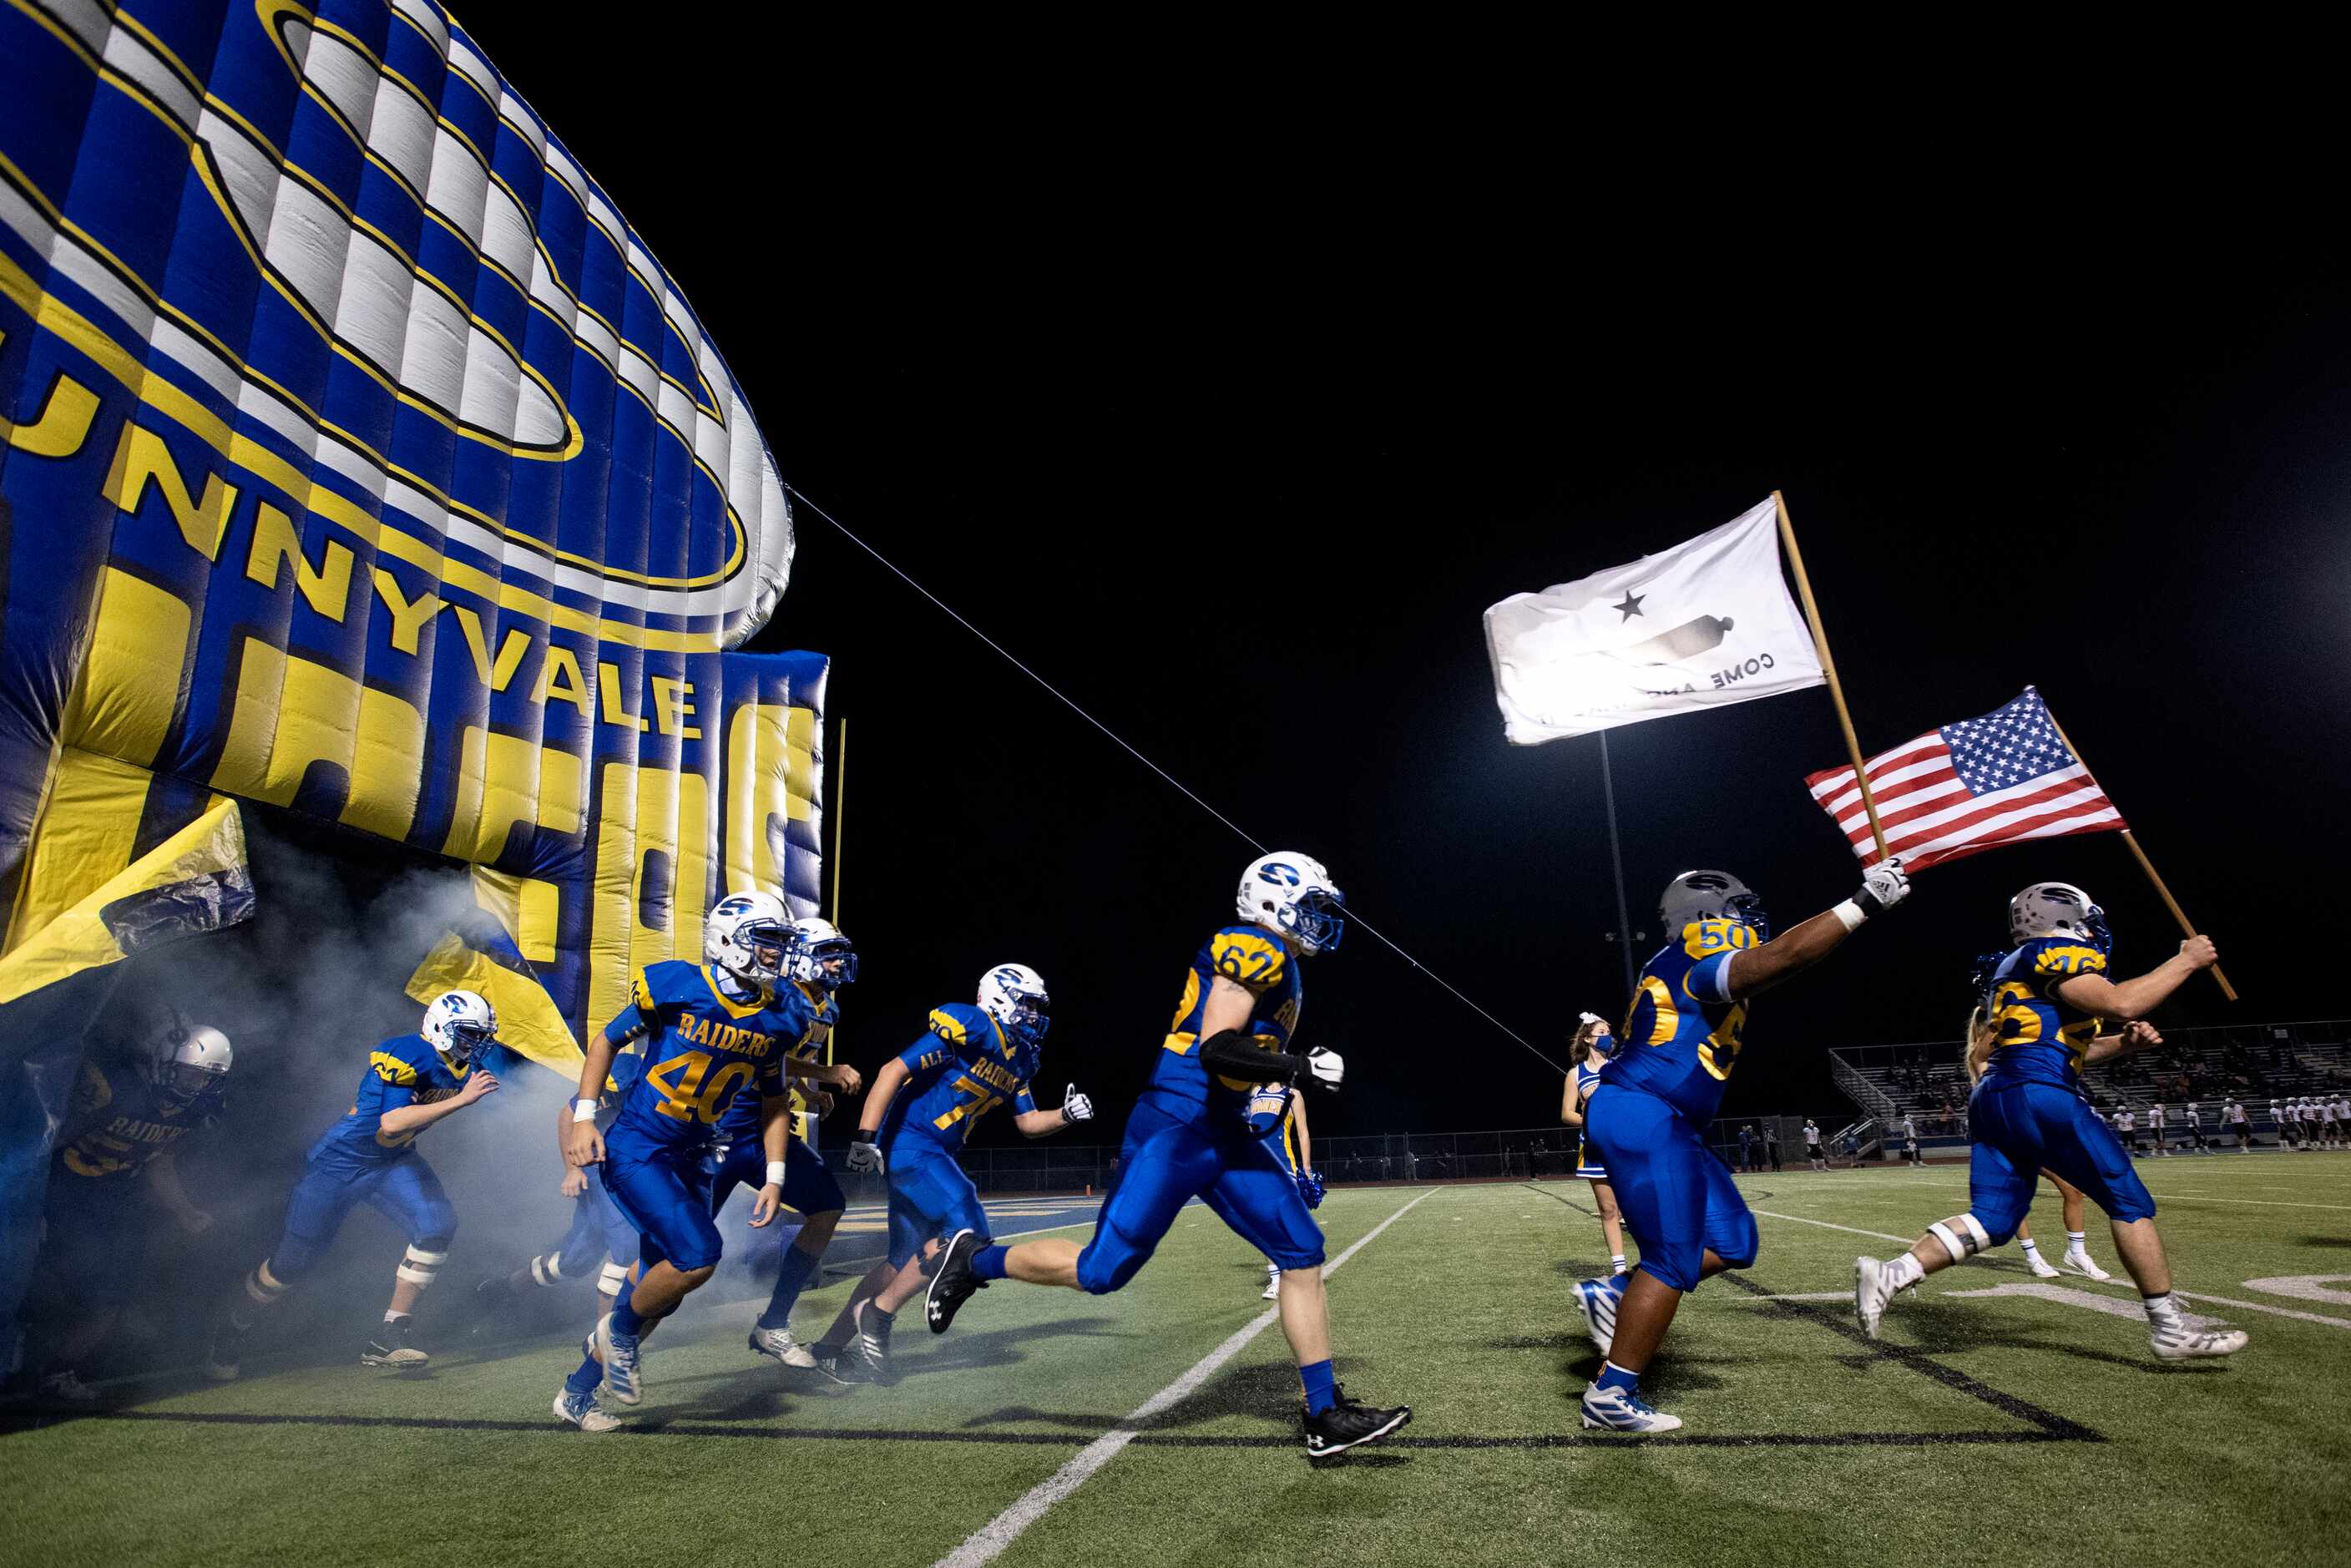 The Sunnyvale Raiders take the field before a high school football game against Ferris on...